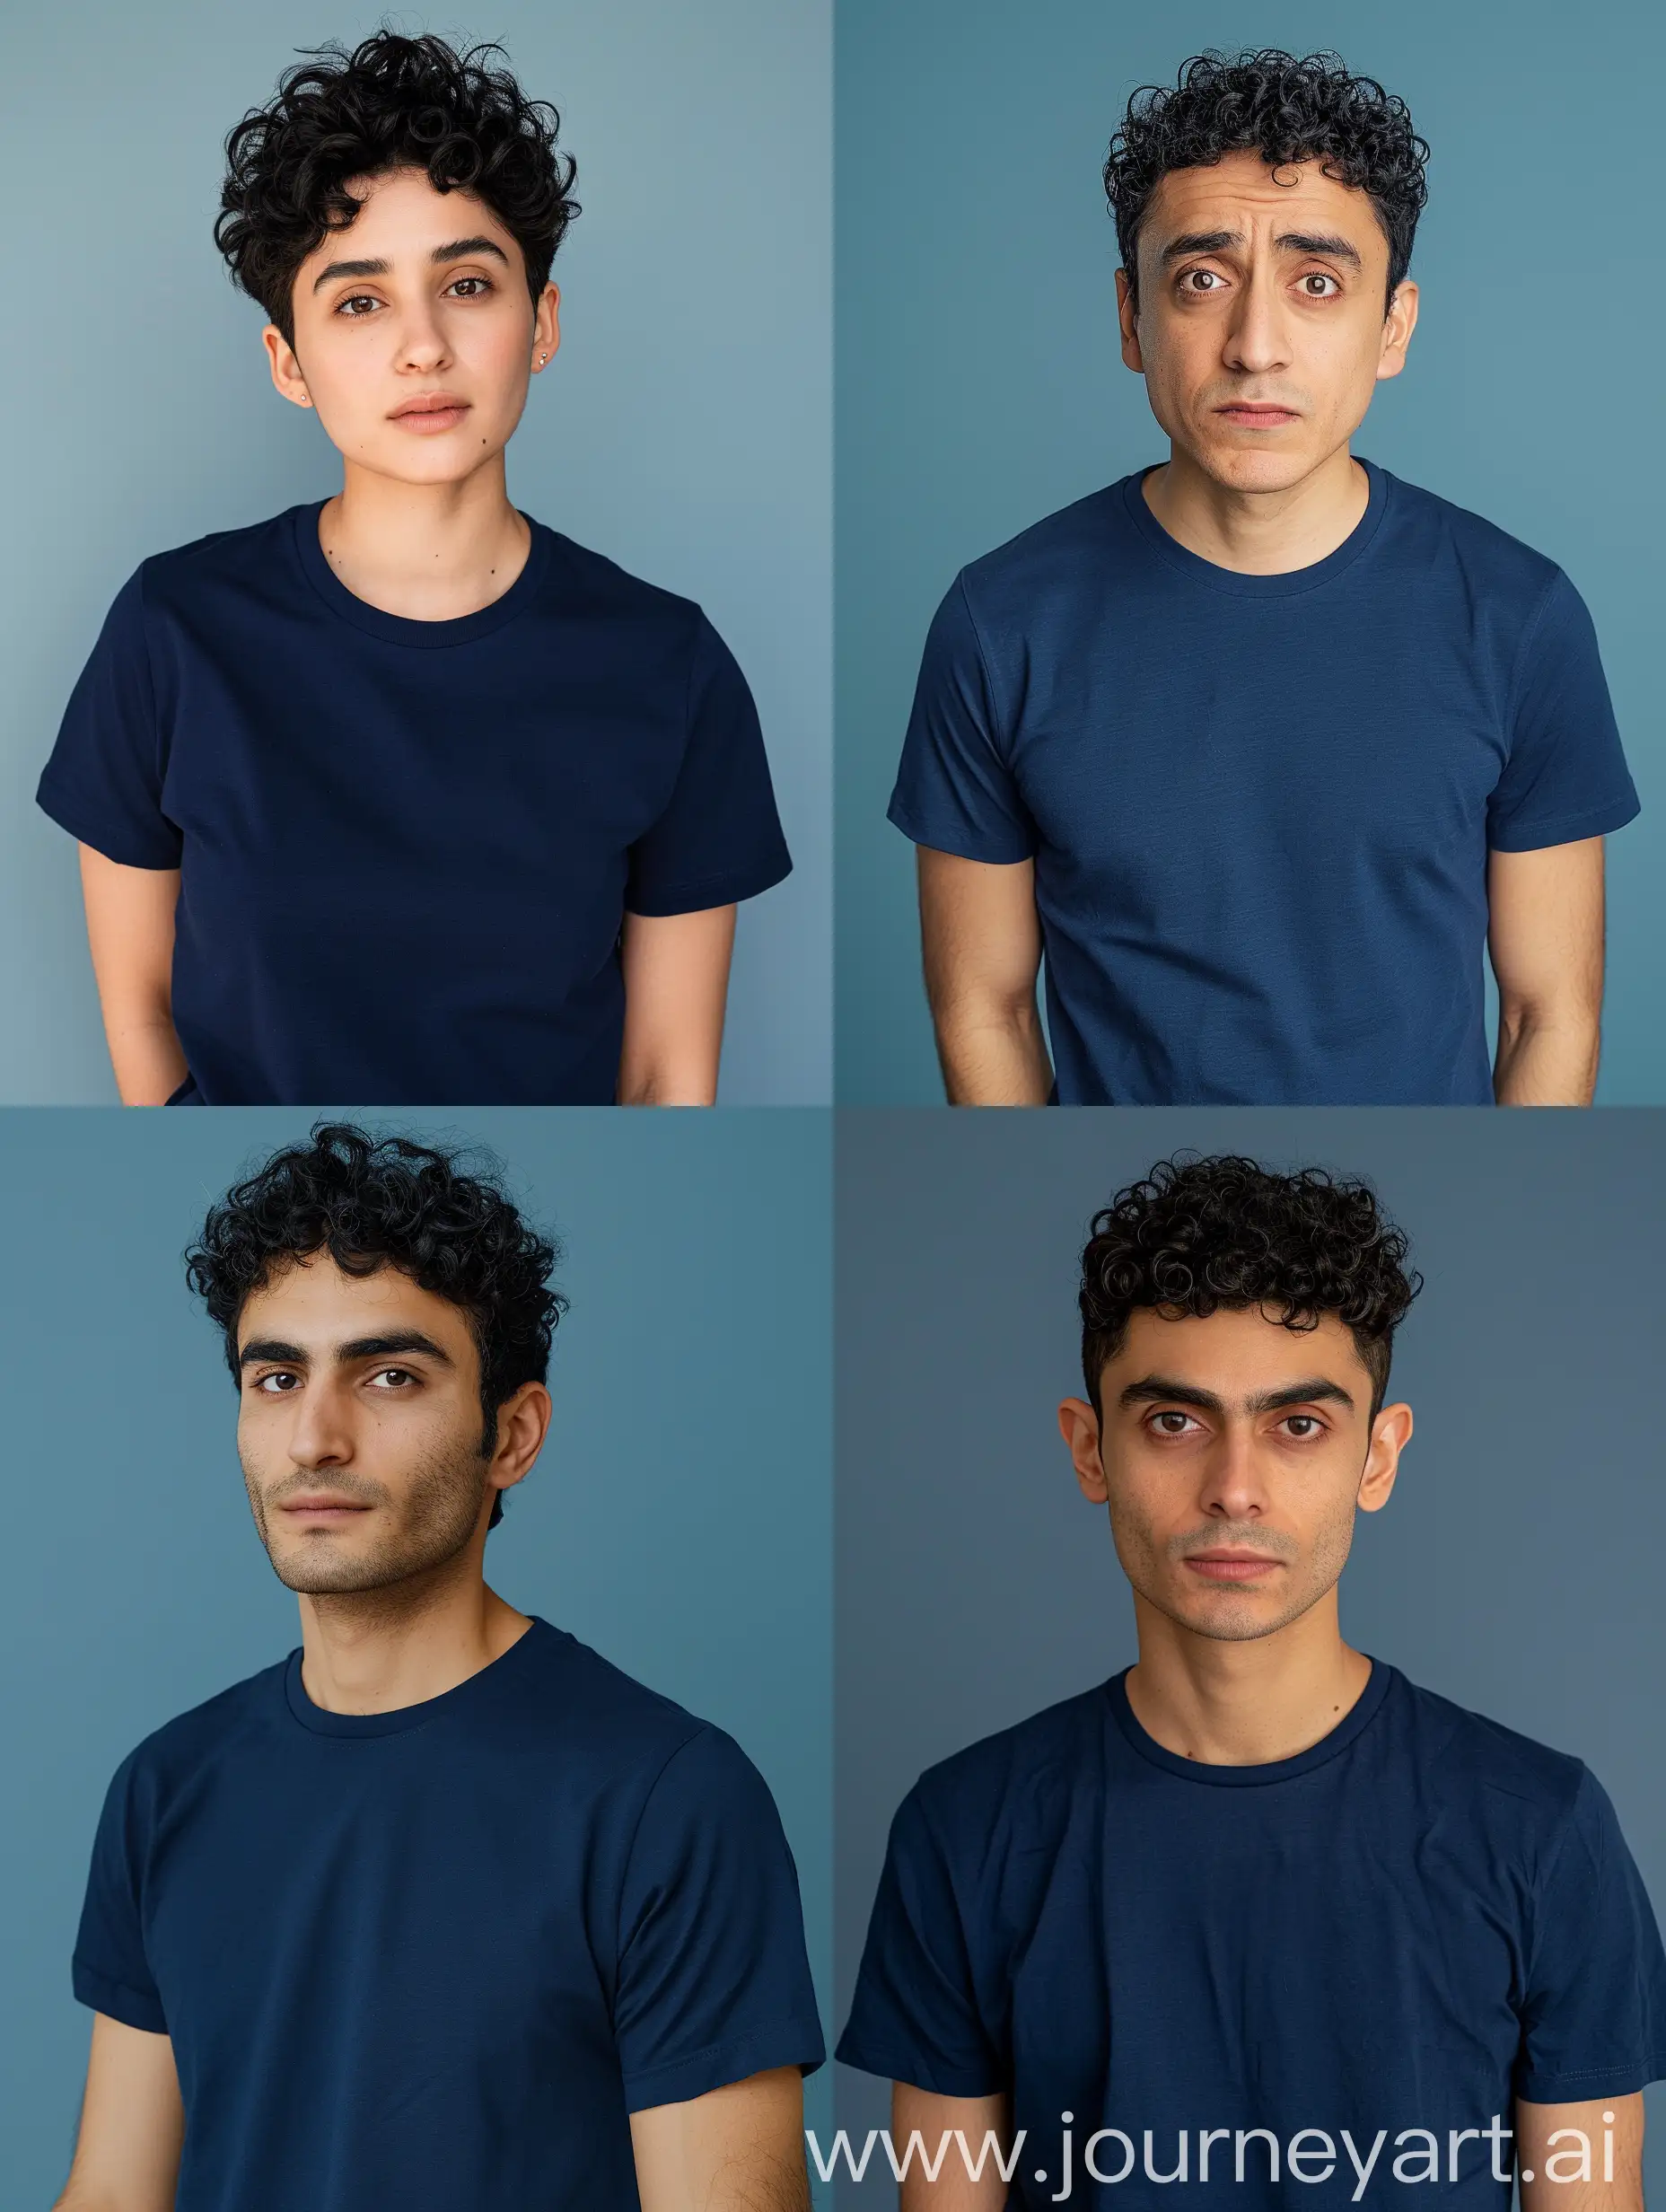 Navid-Mohammadzadeh-in-Navy-Blue-TShirt-on-Simple-Background